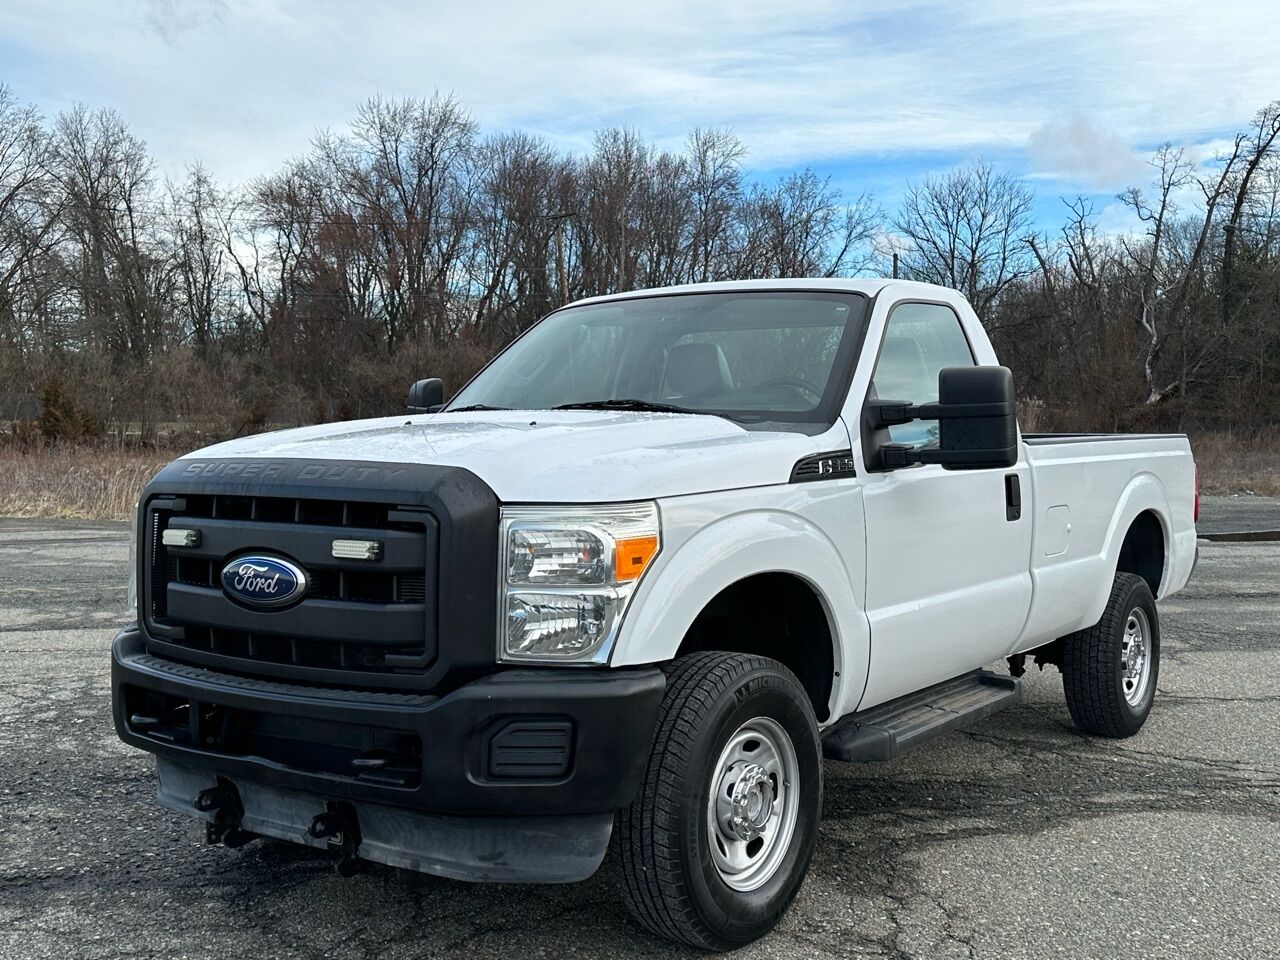 2011 Ford F-350 Super Duty For Sale - Carsforsale.com®